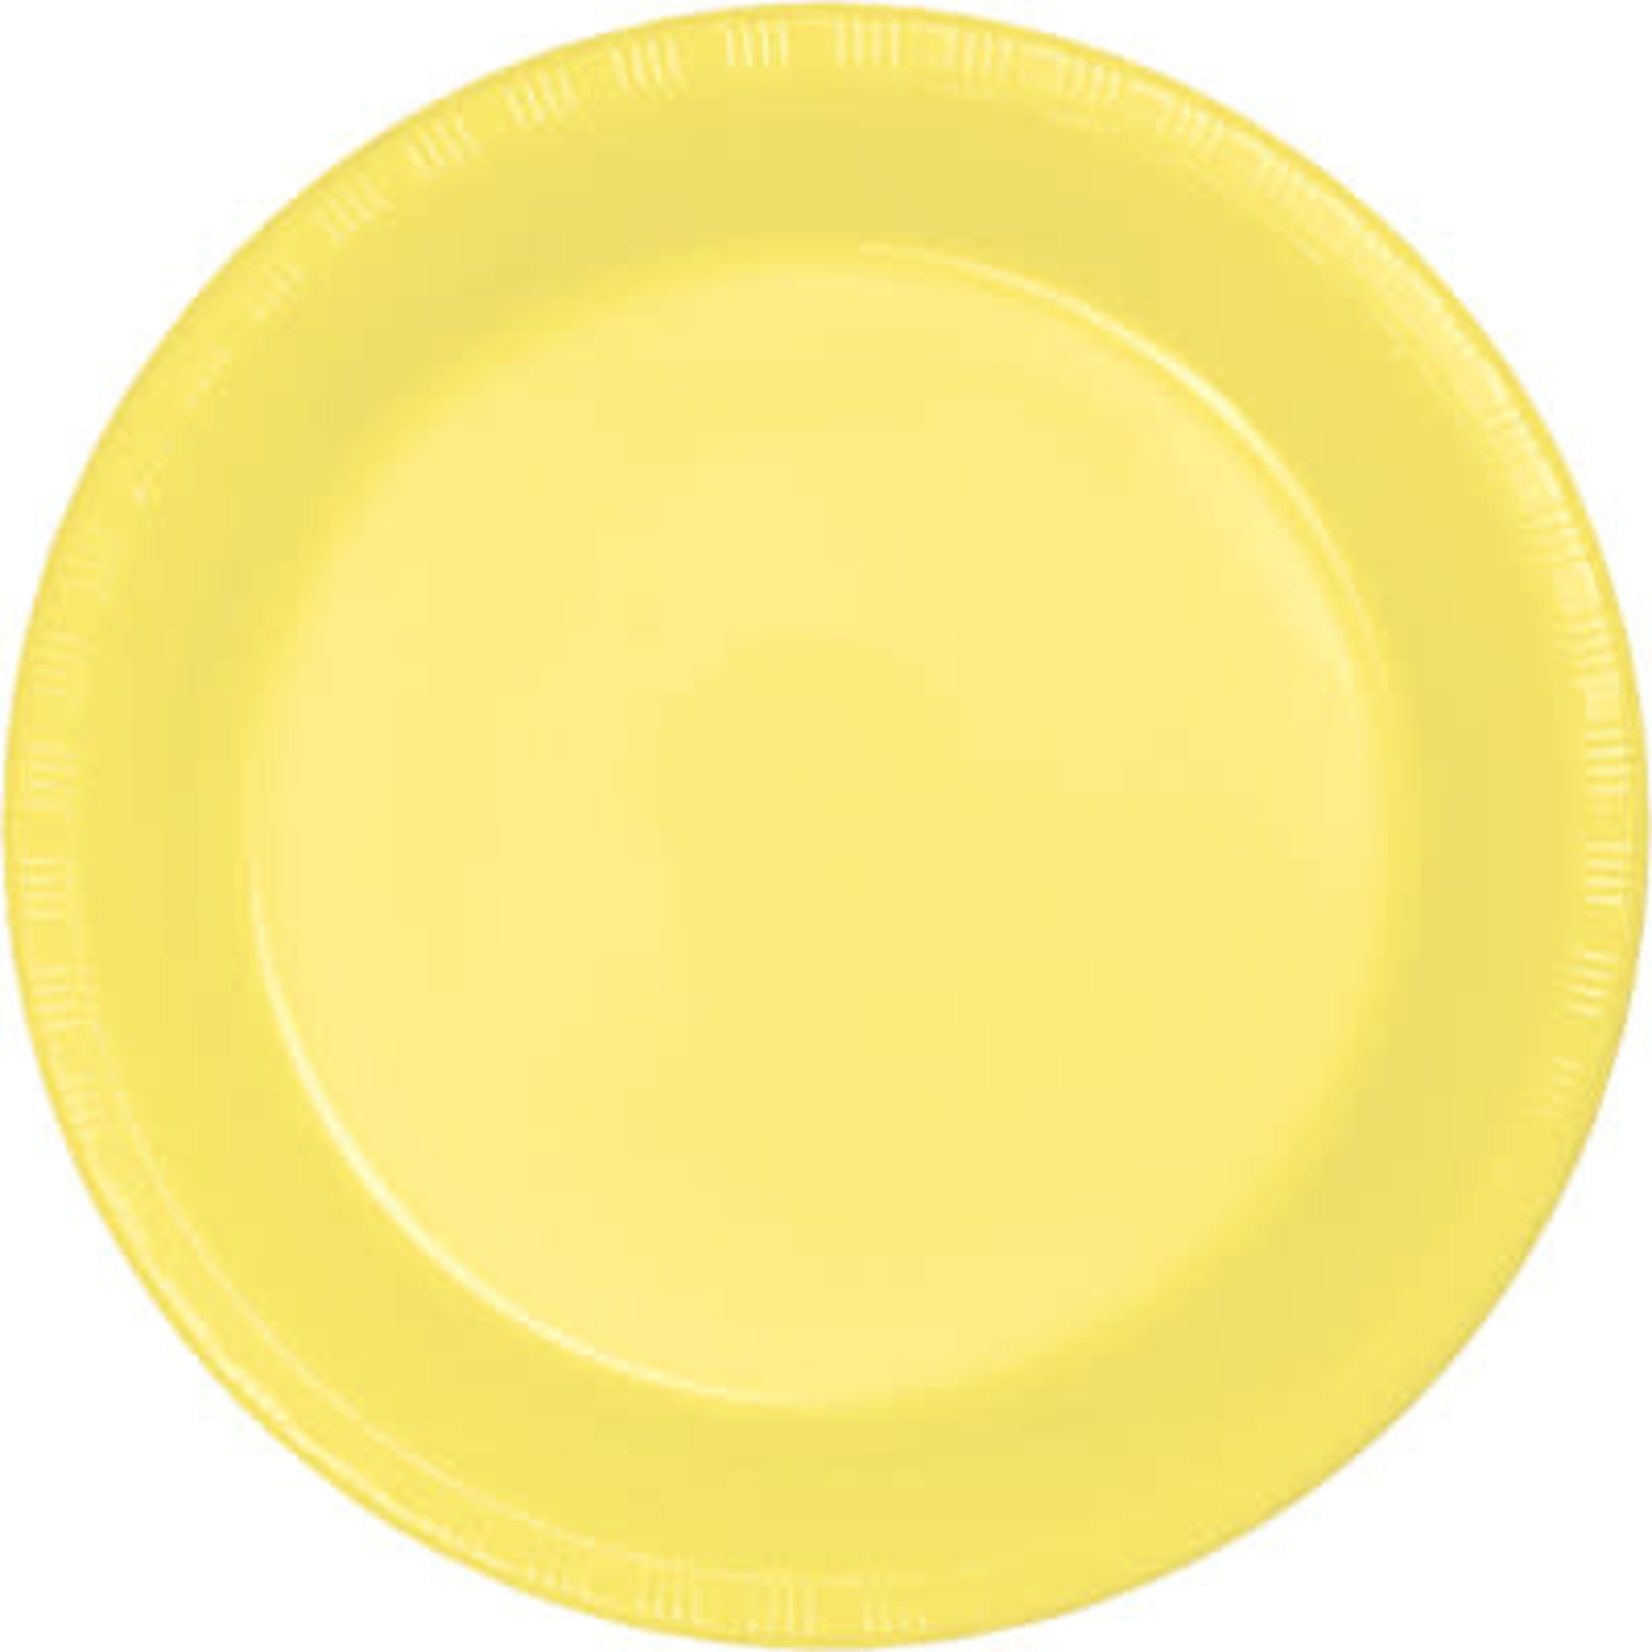 Touch of Color 7" Mimosa Yellow Paper Plates - 24ct.